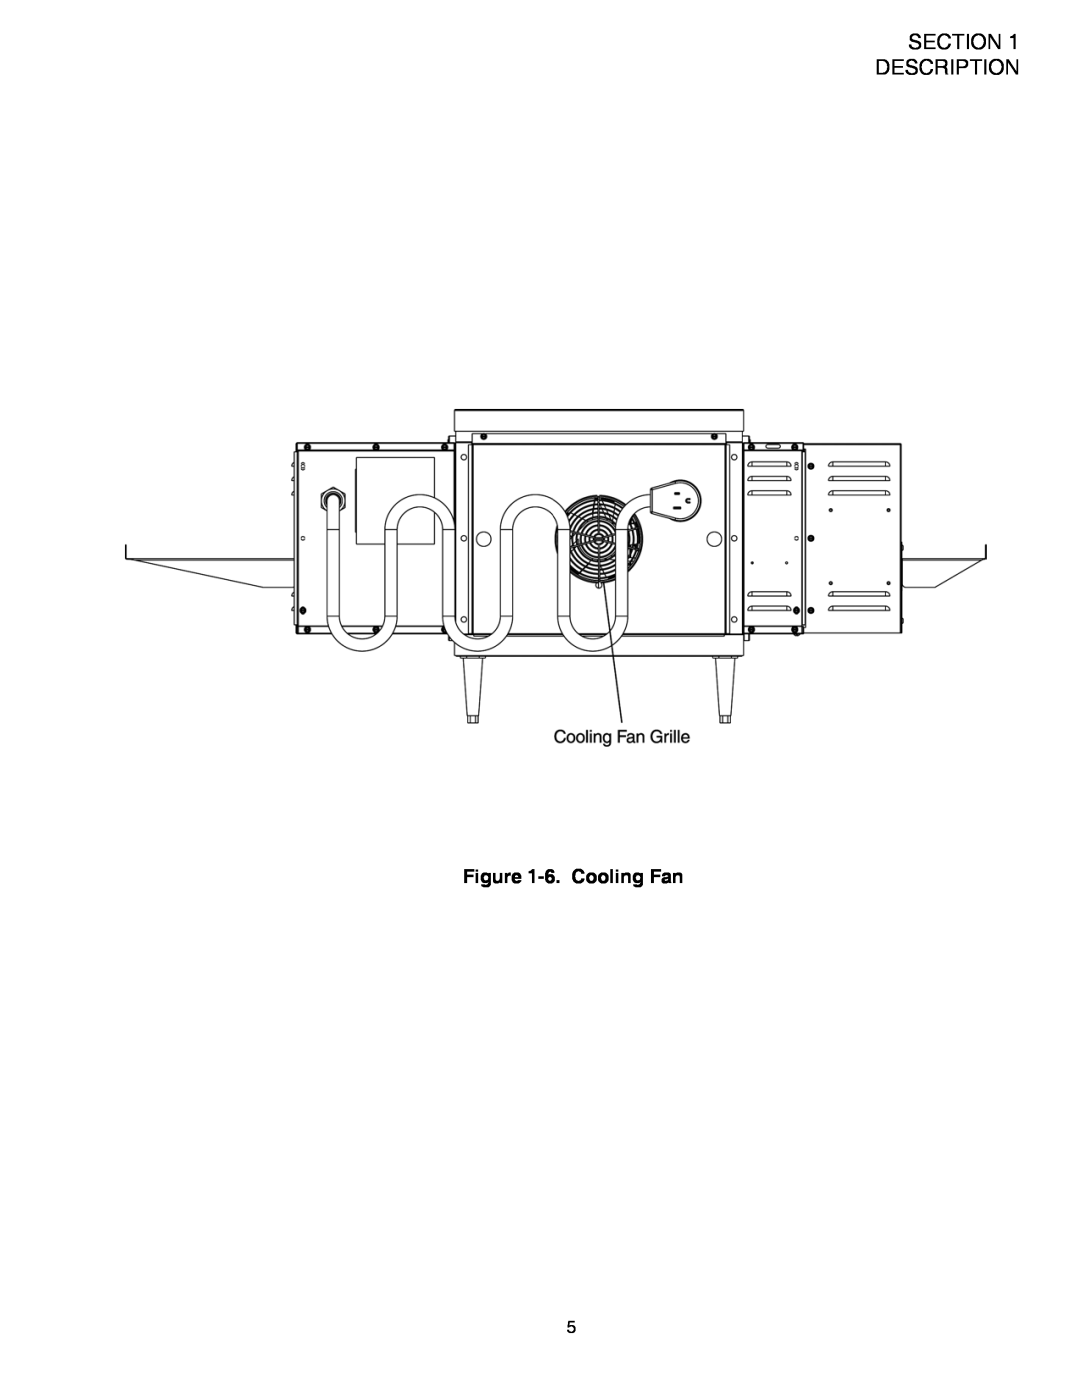 Middleby Marshall PS528E, PS528 (Double), PS528 (Triple) installation manual Section Description, 6. Cooling Fan 